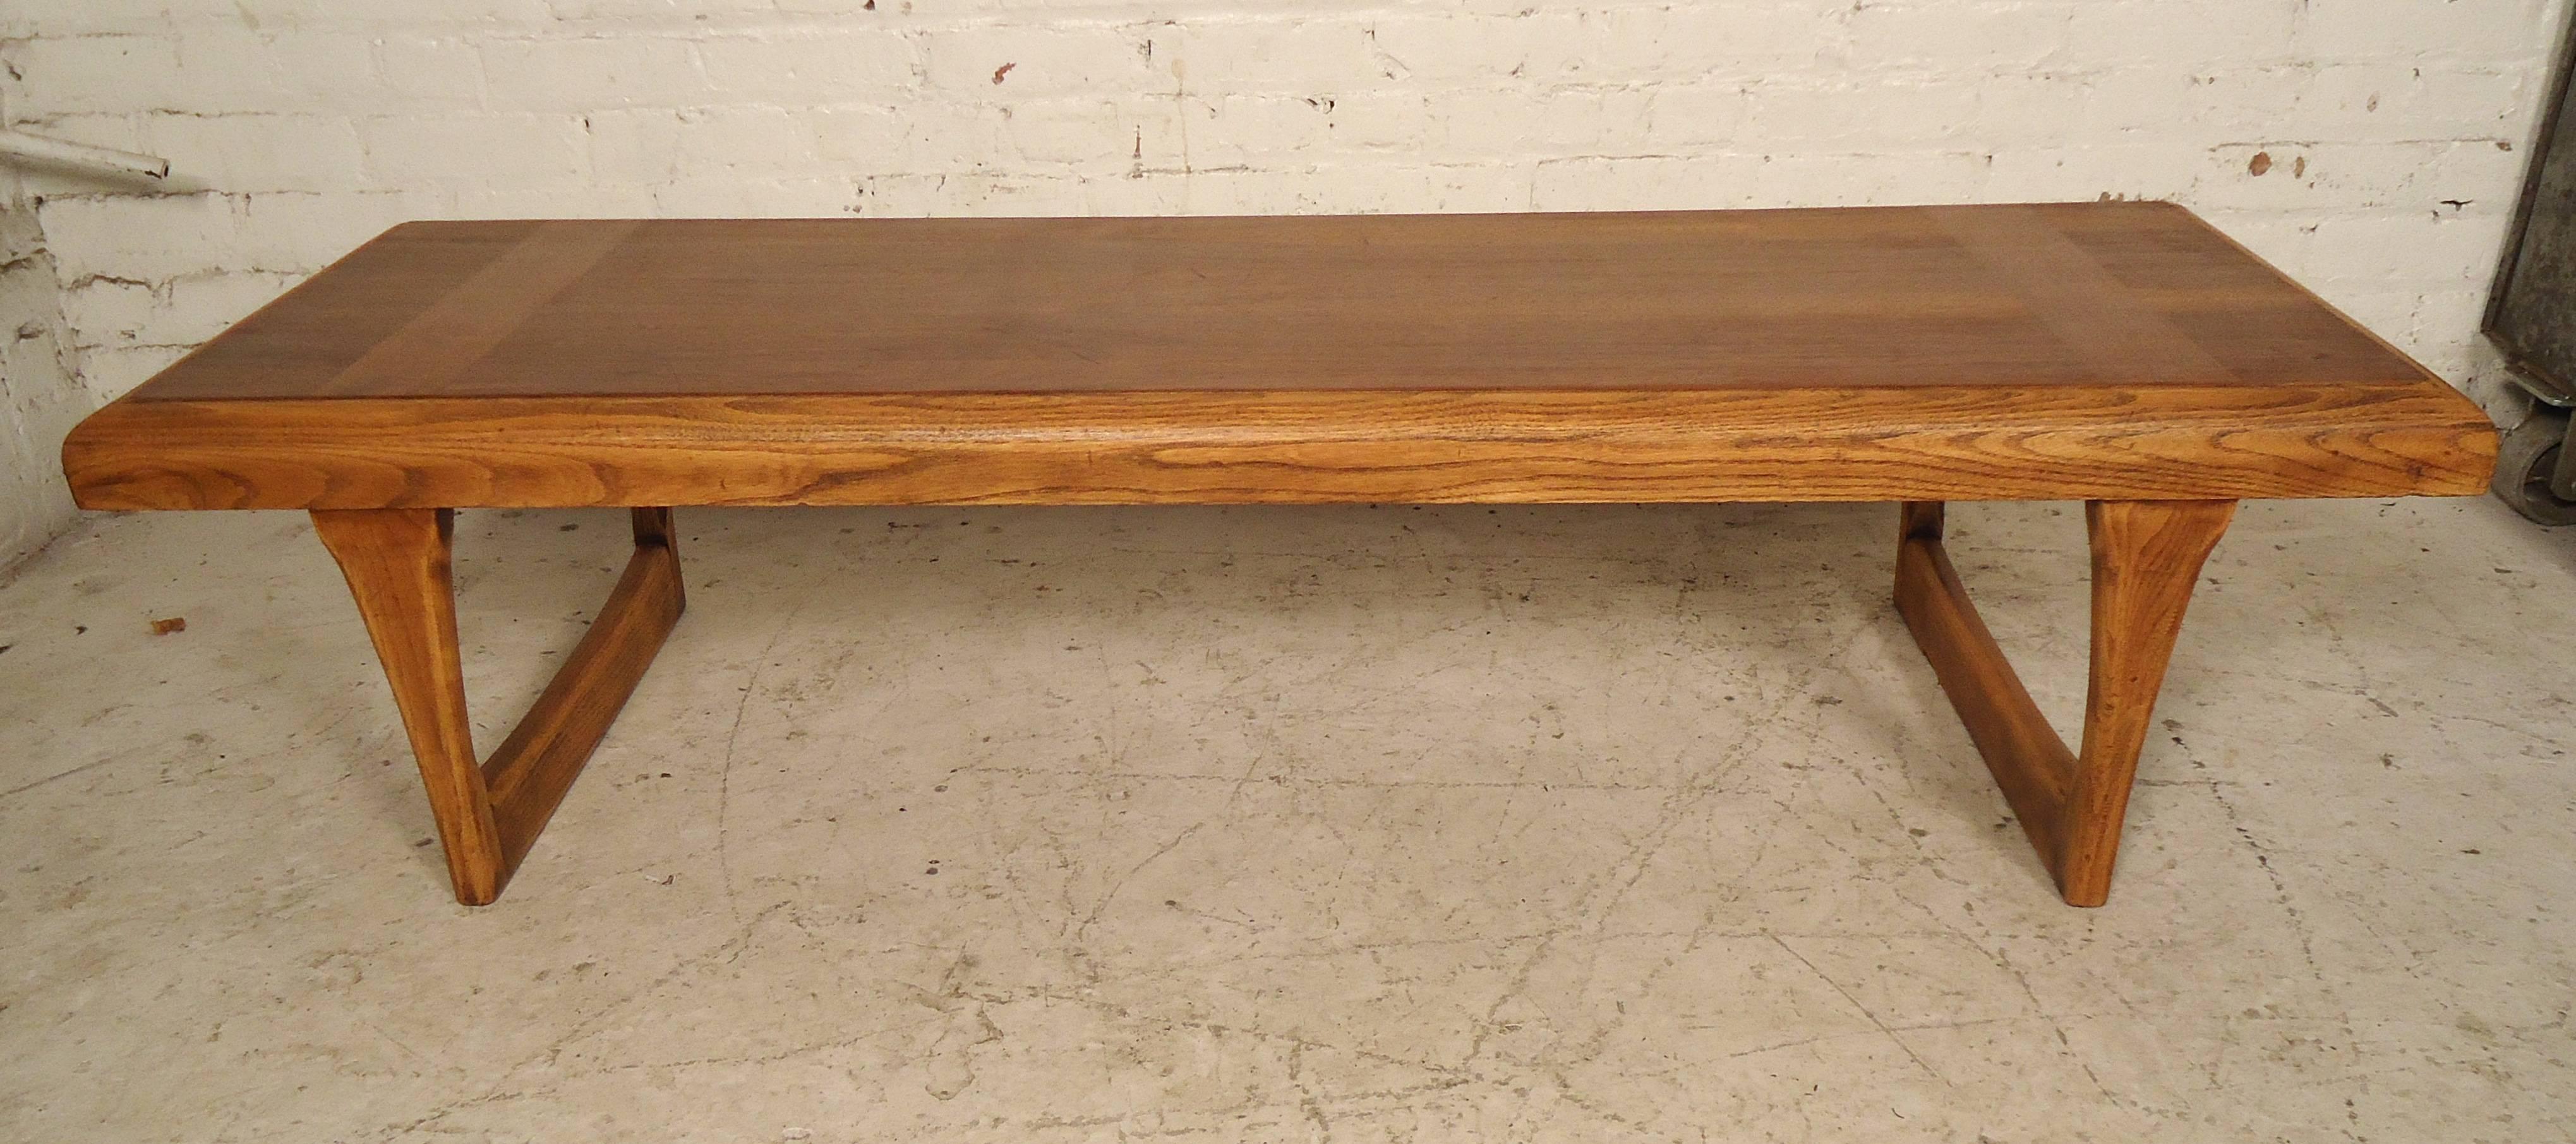 This vintage modern coffee table by Lane features rich walnut grain, and a popular sled leg base.

(Please confirm item location - NY or NJ - with dealer).